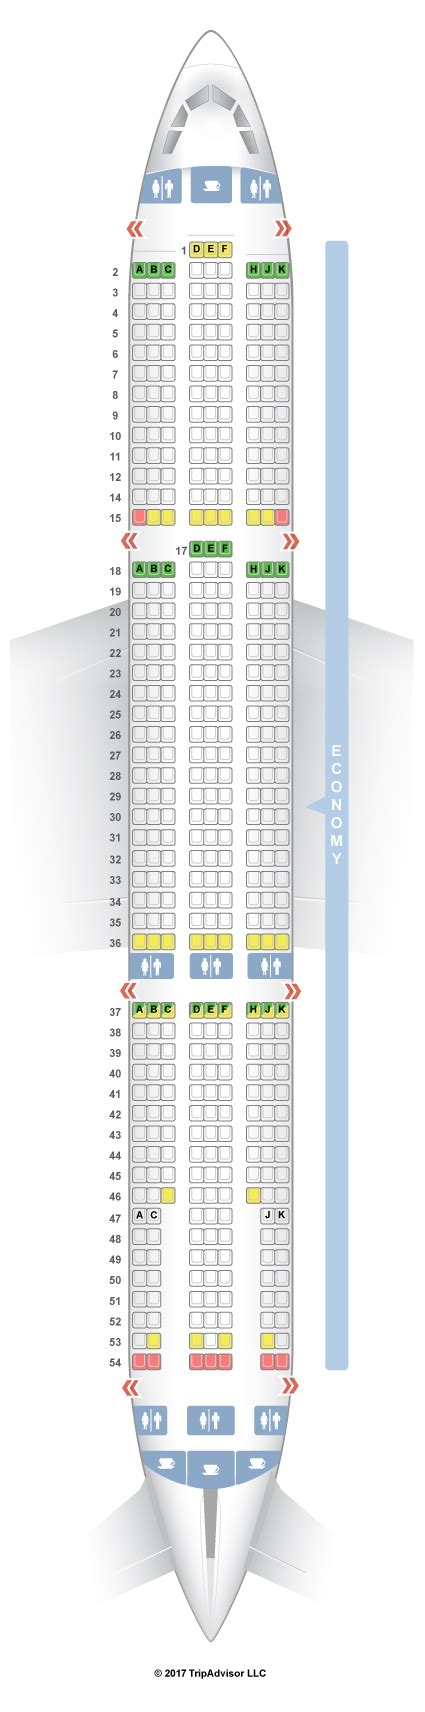 Lion Air Airbus A Seat Map Updated Find The Best Seat Seatmaps Sexiz Pix